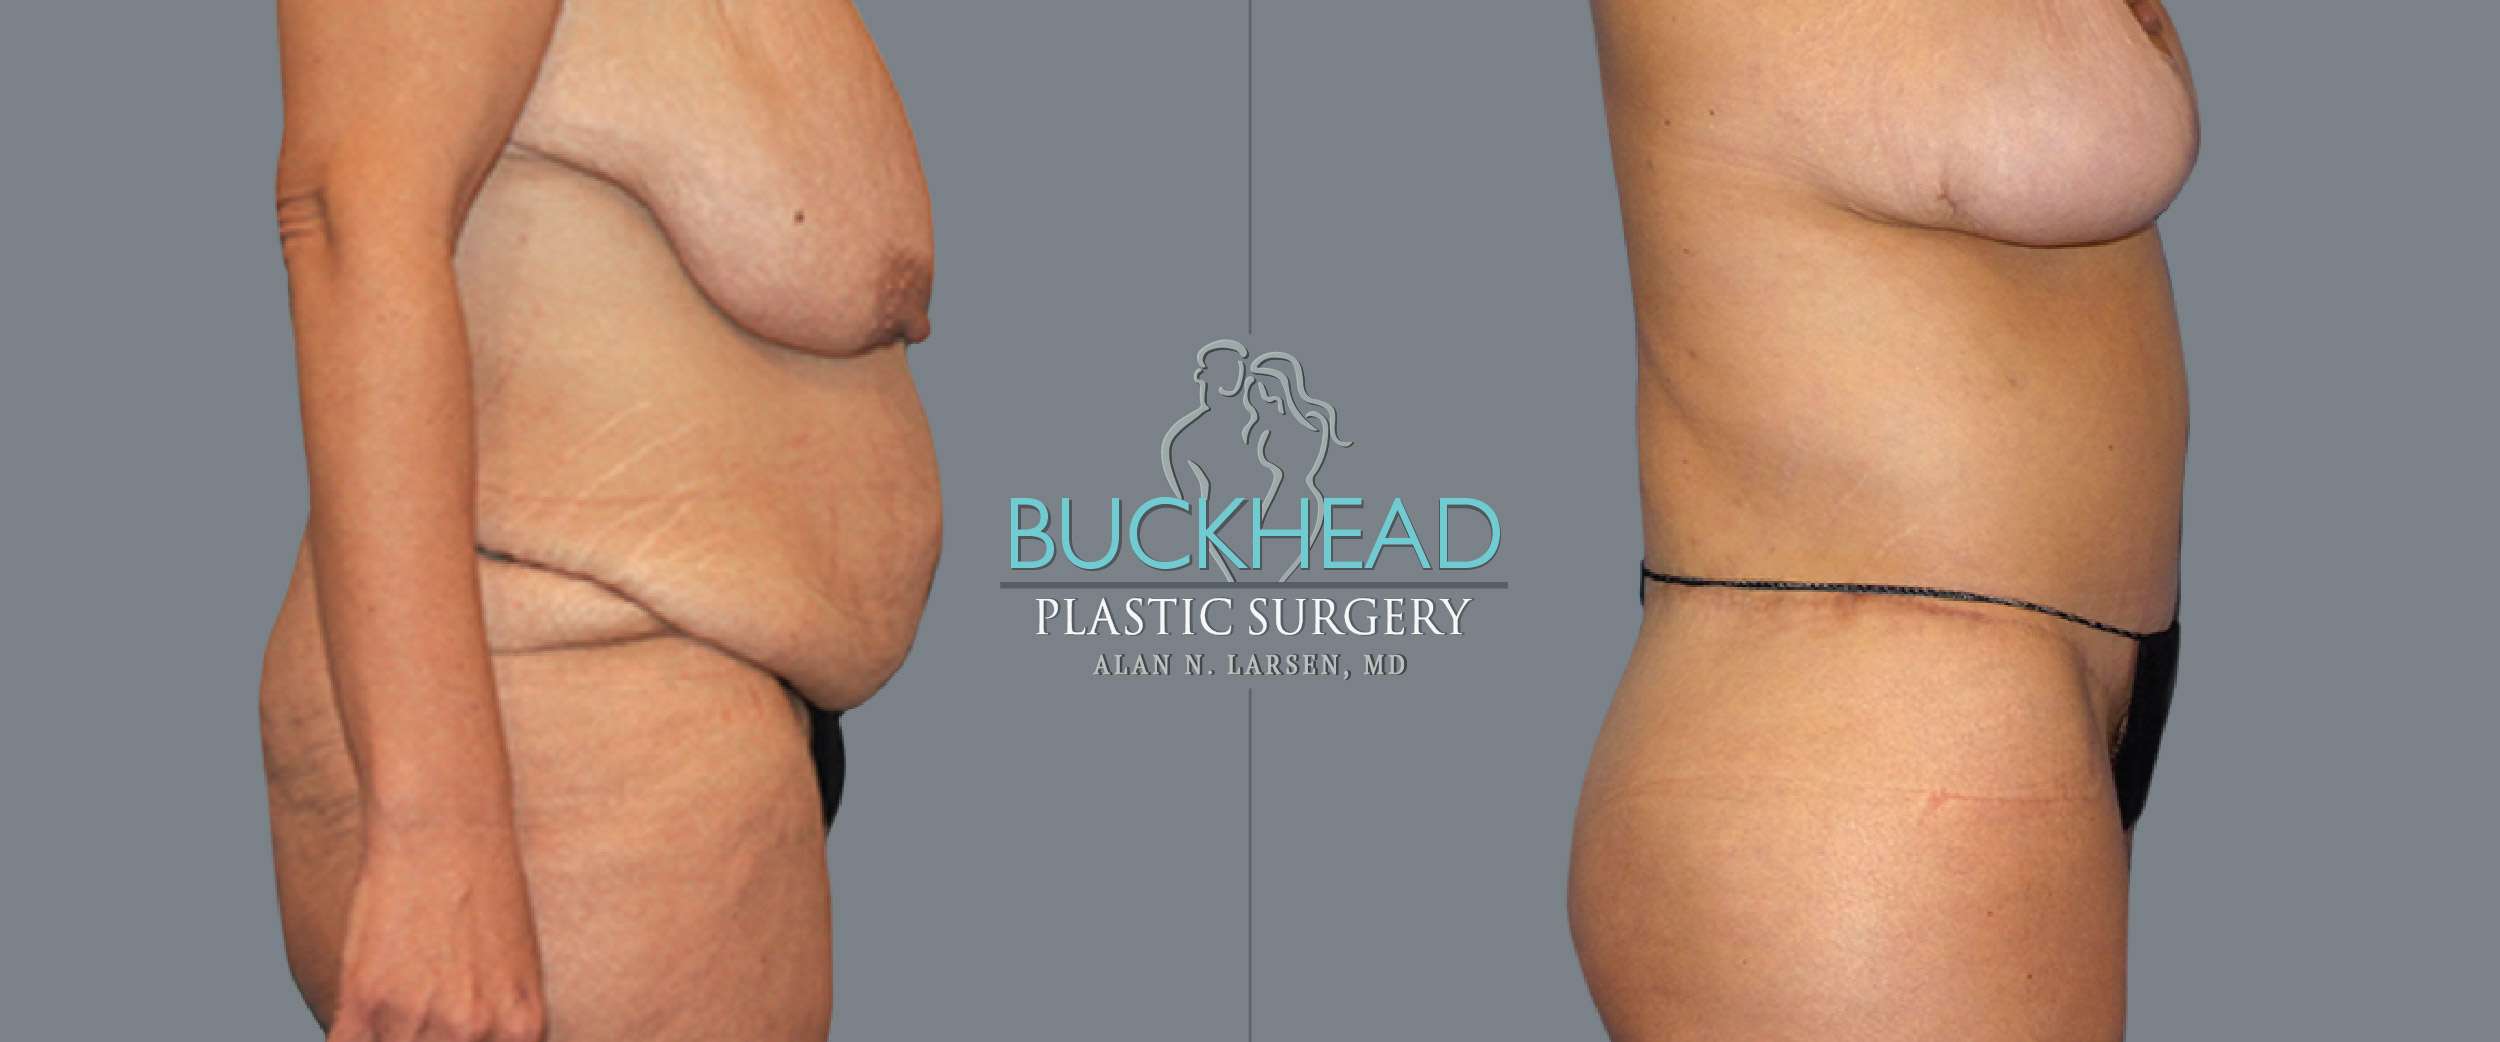 Before and After Photo gallery | Body Lift | Buckhead Plastic Surgery | Double Board-Certified Plastic Surgeon in Atlanta GA